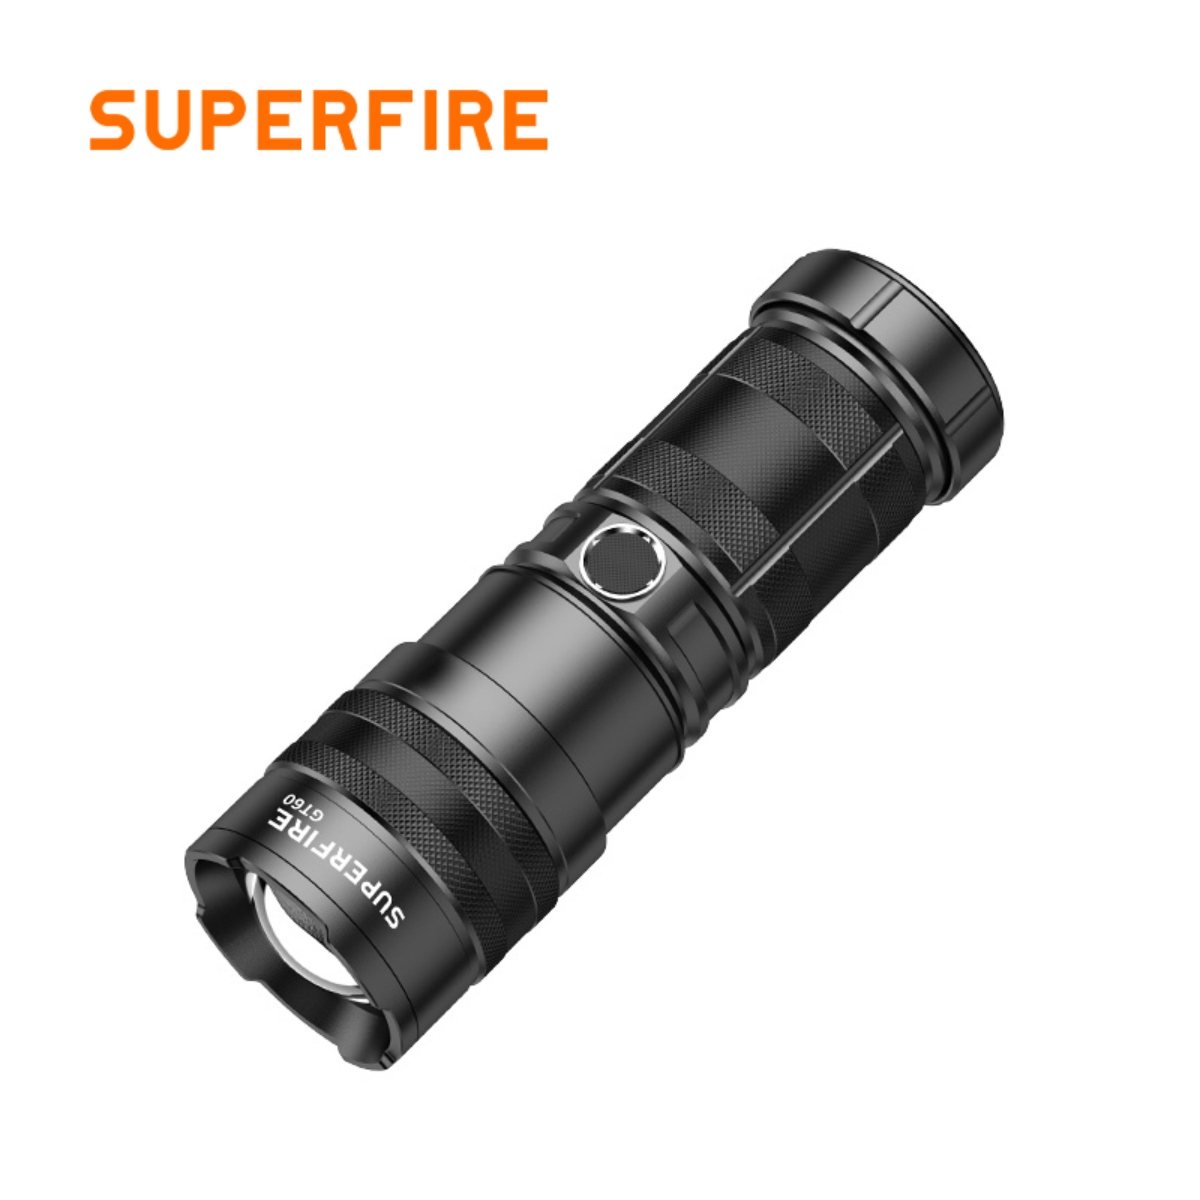 GT60 Zoom high power flashlight with tail light